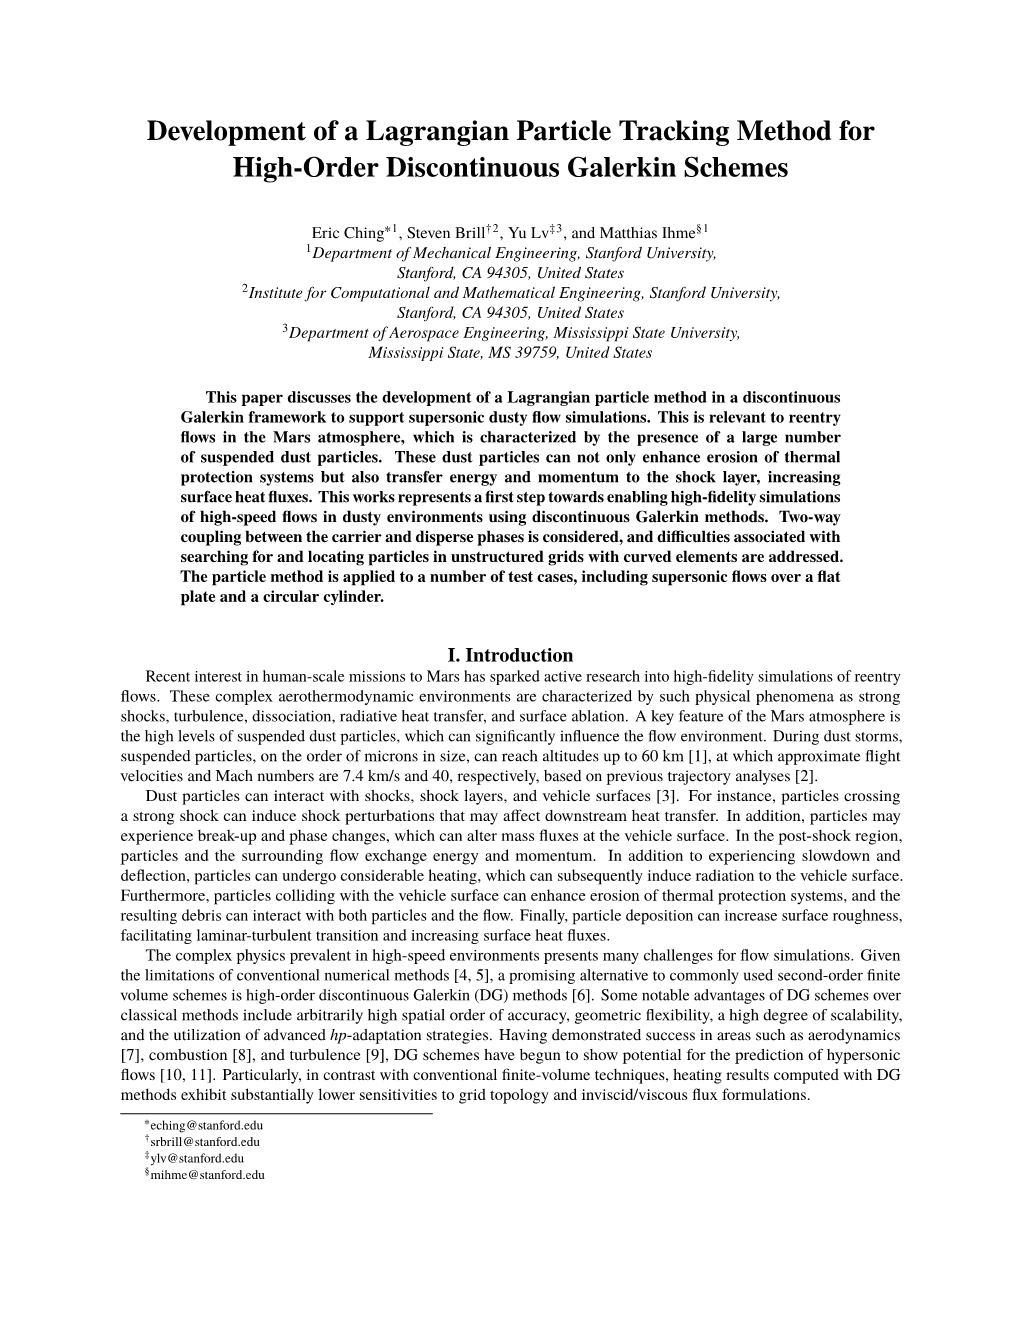 Development of a Lagrangian Particle Tracking Method for High-Order Discontinuous Galerkin Schemes